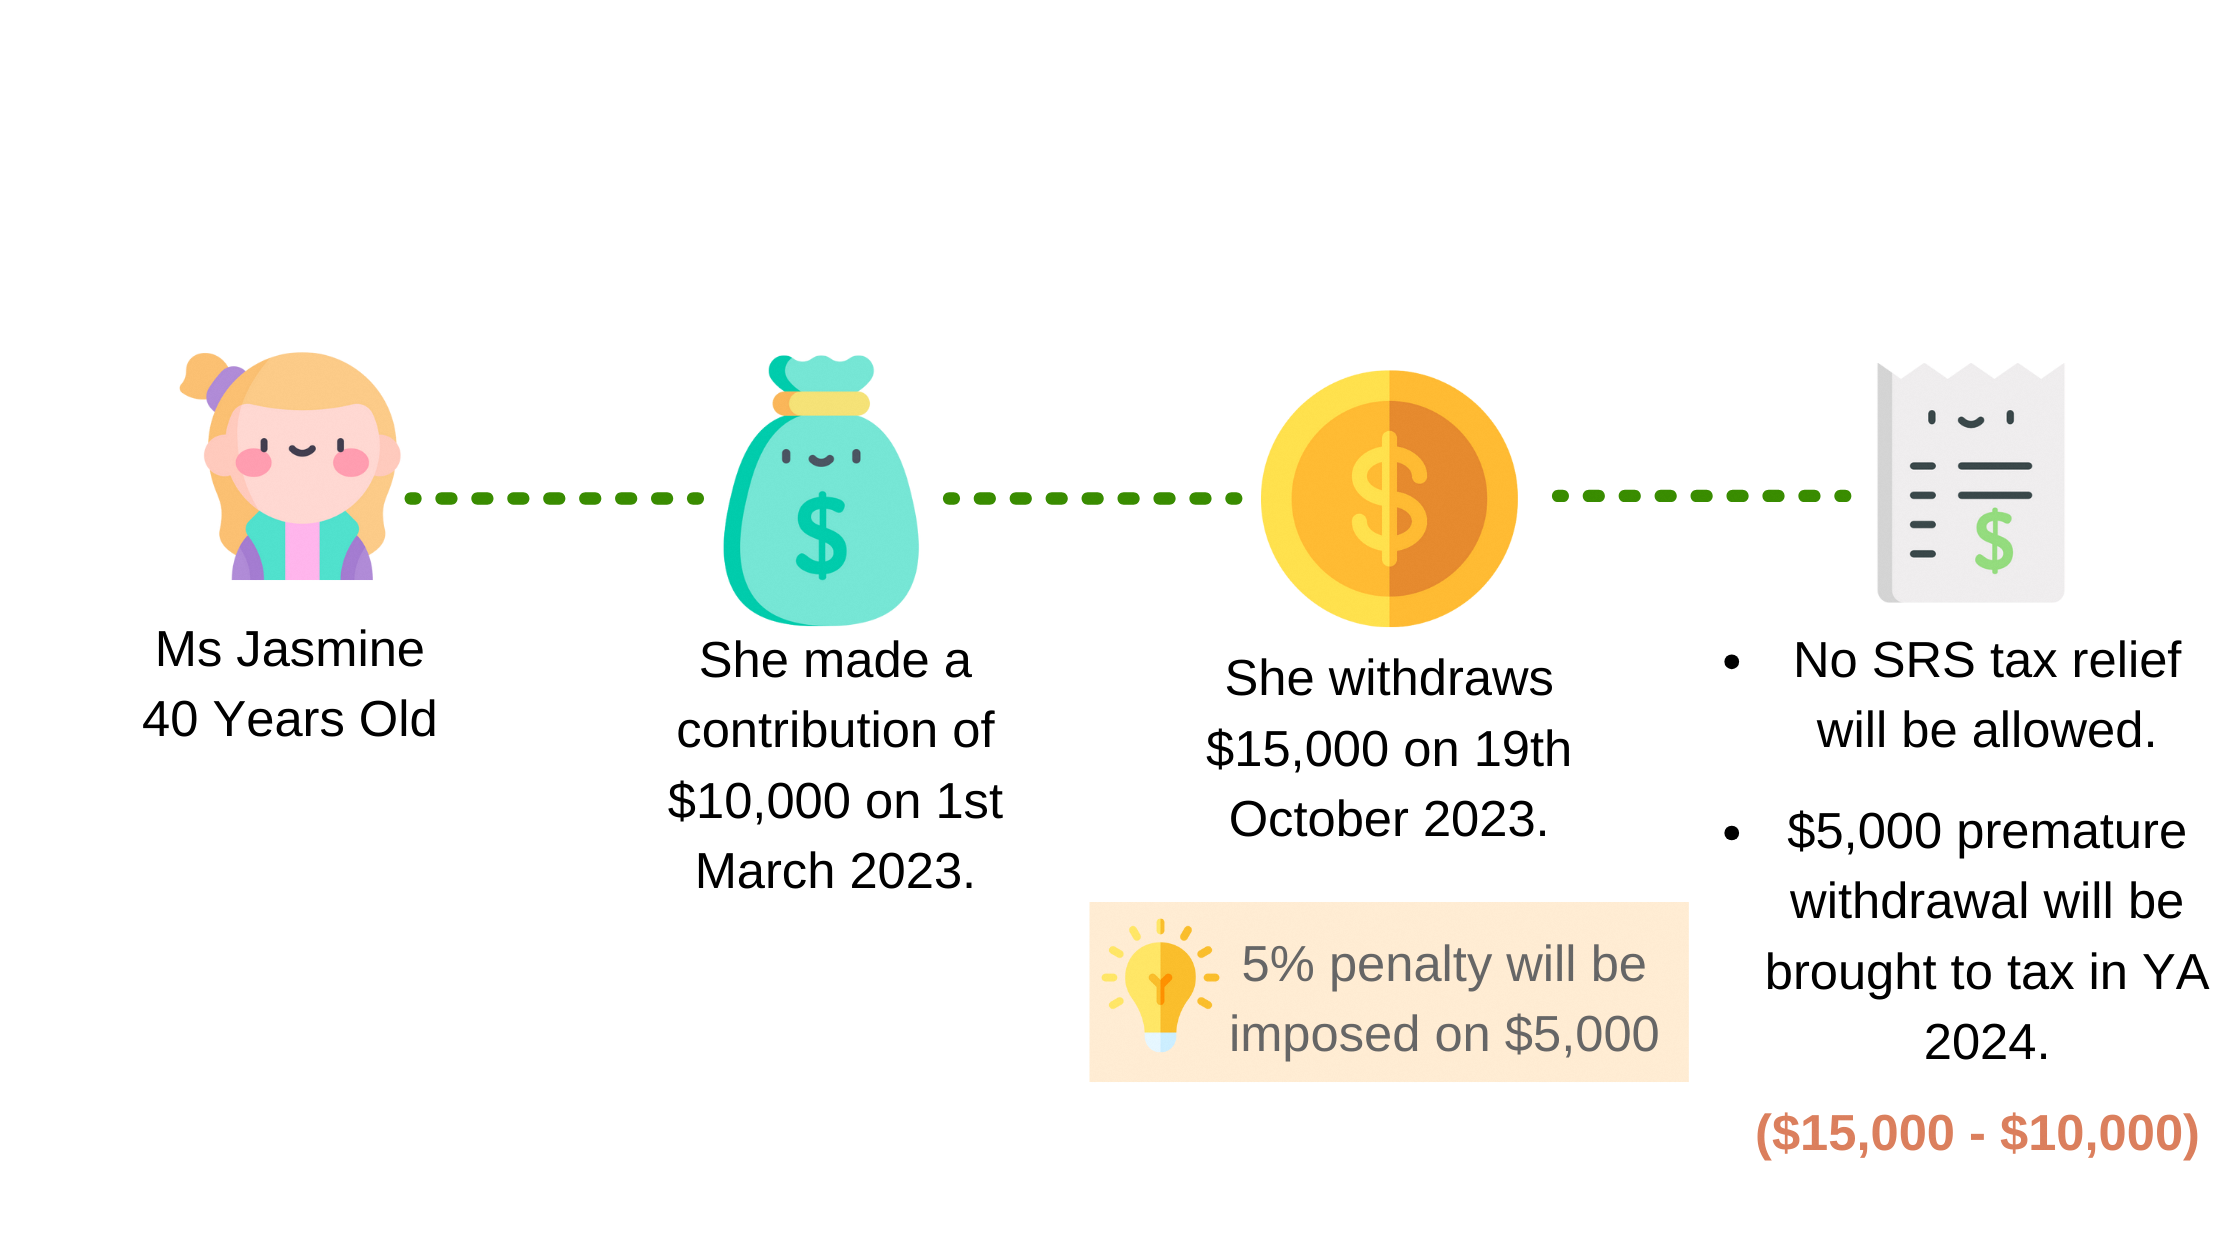 Contribution made before withdrawal in the same year, where withdrawal is more than the amount contributed